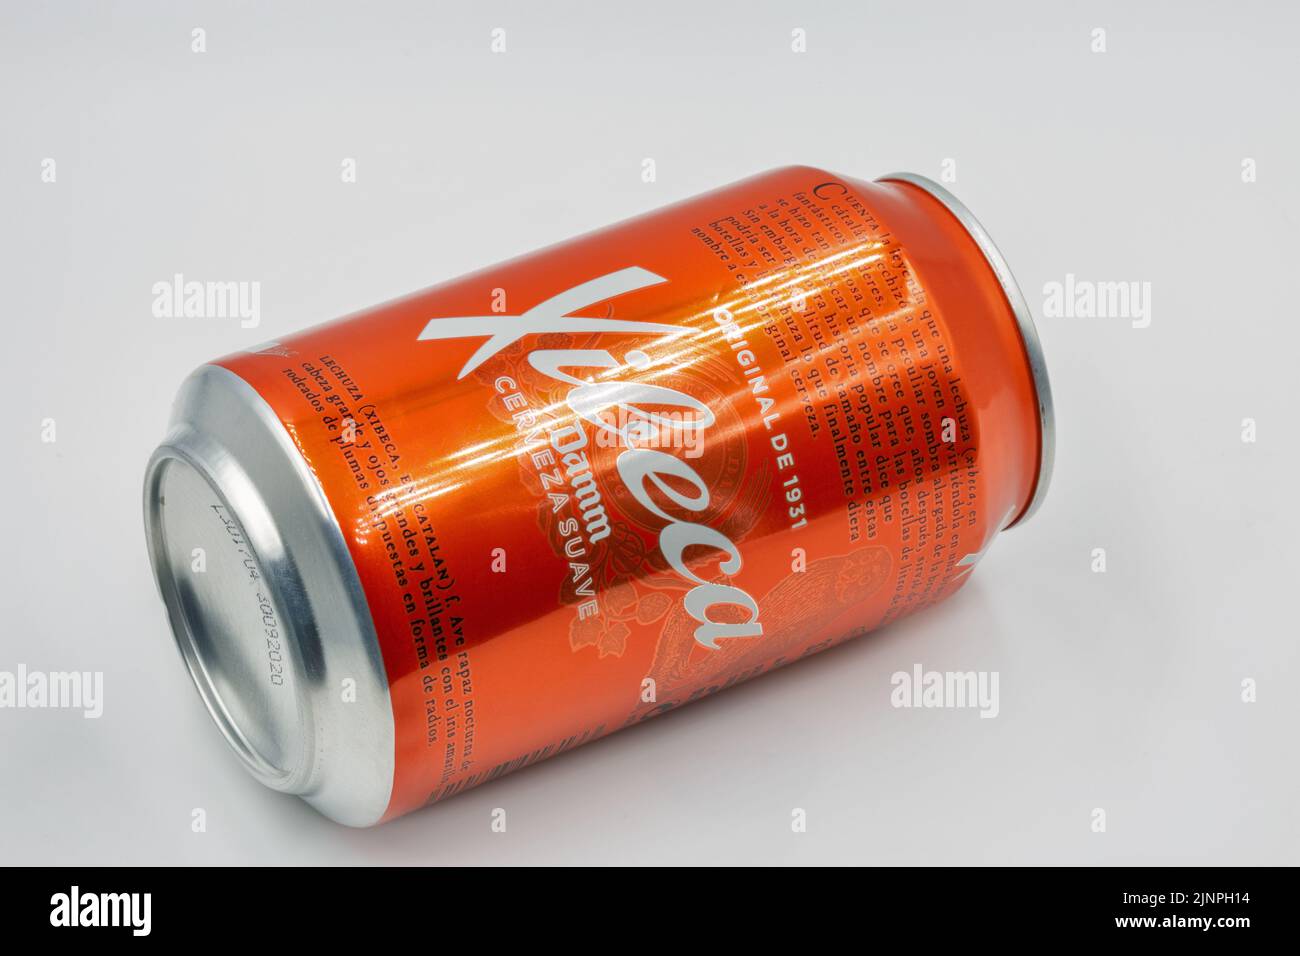 Kyiv, Ukraine - June 10, 2021: Studio shoot of Spanish beer Xibeca can from manufacturer Barcelona brewery S.A. Damm closeup on white. It produced and Stock Photo